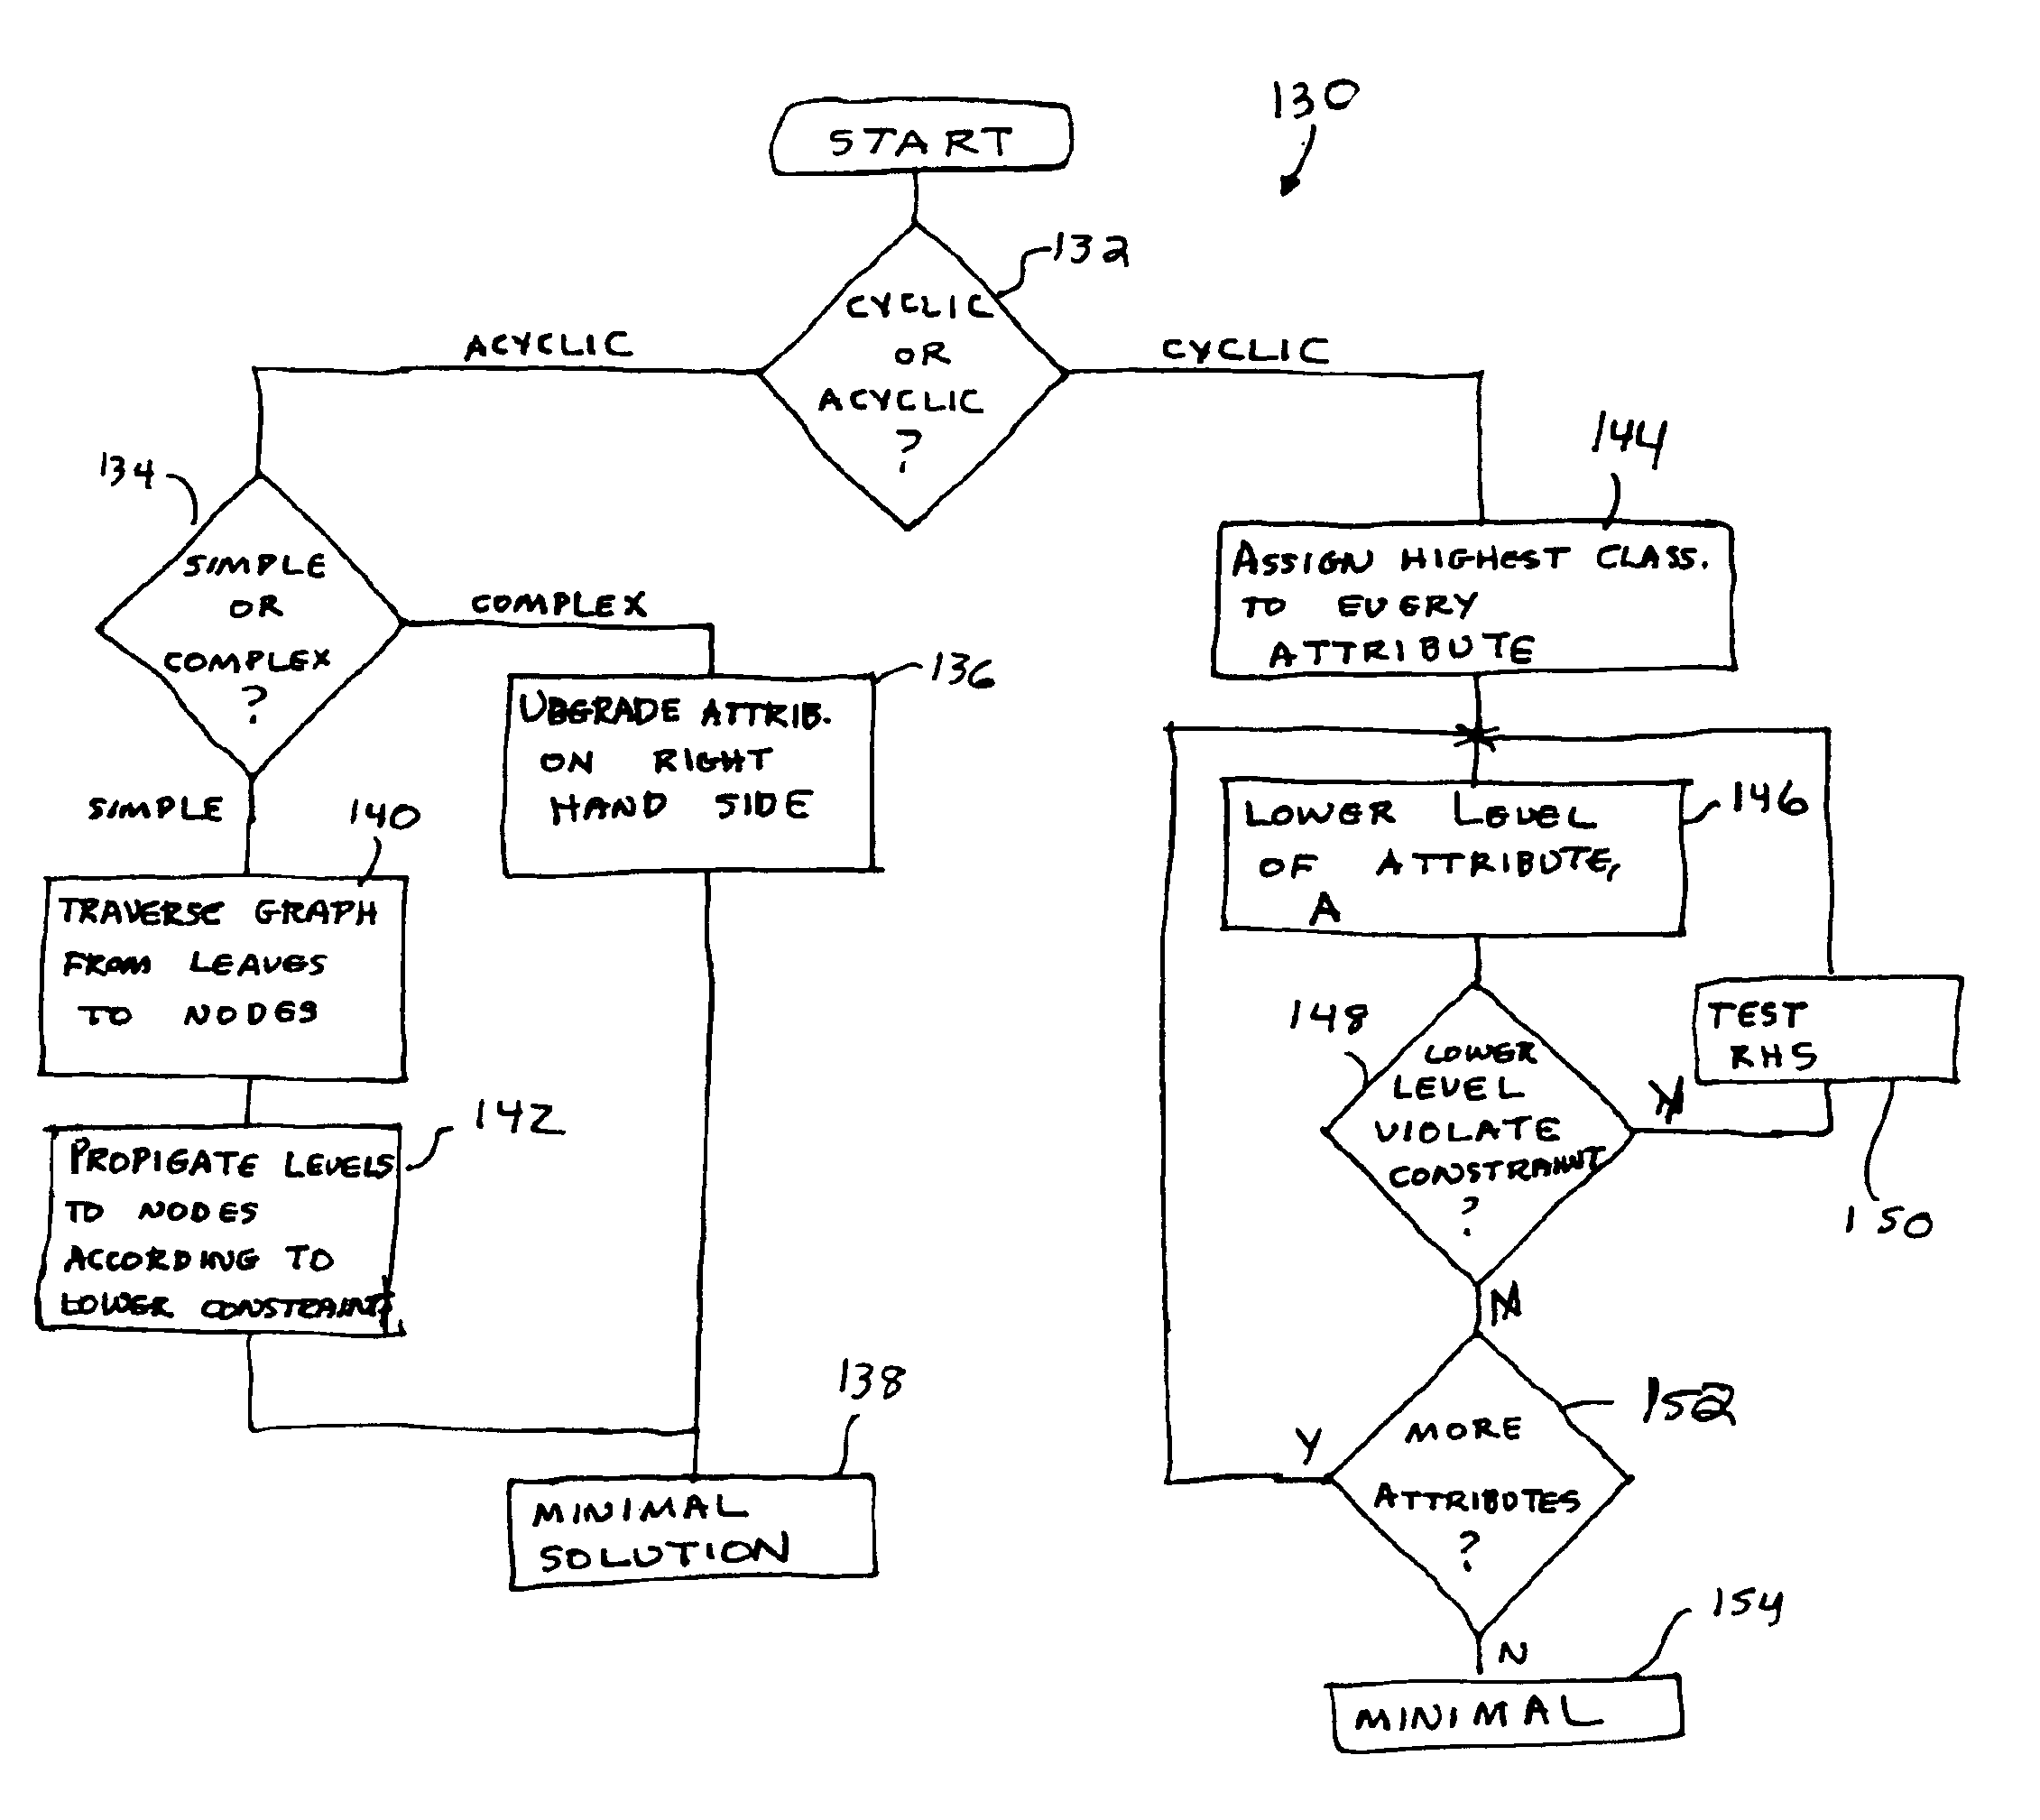 Lattice-based security classification system and method